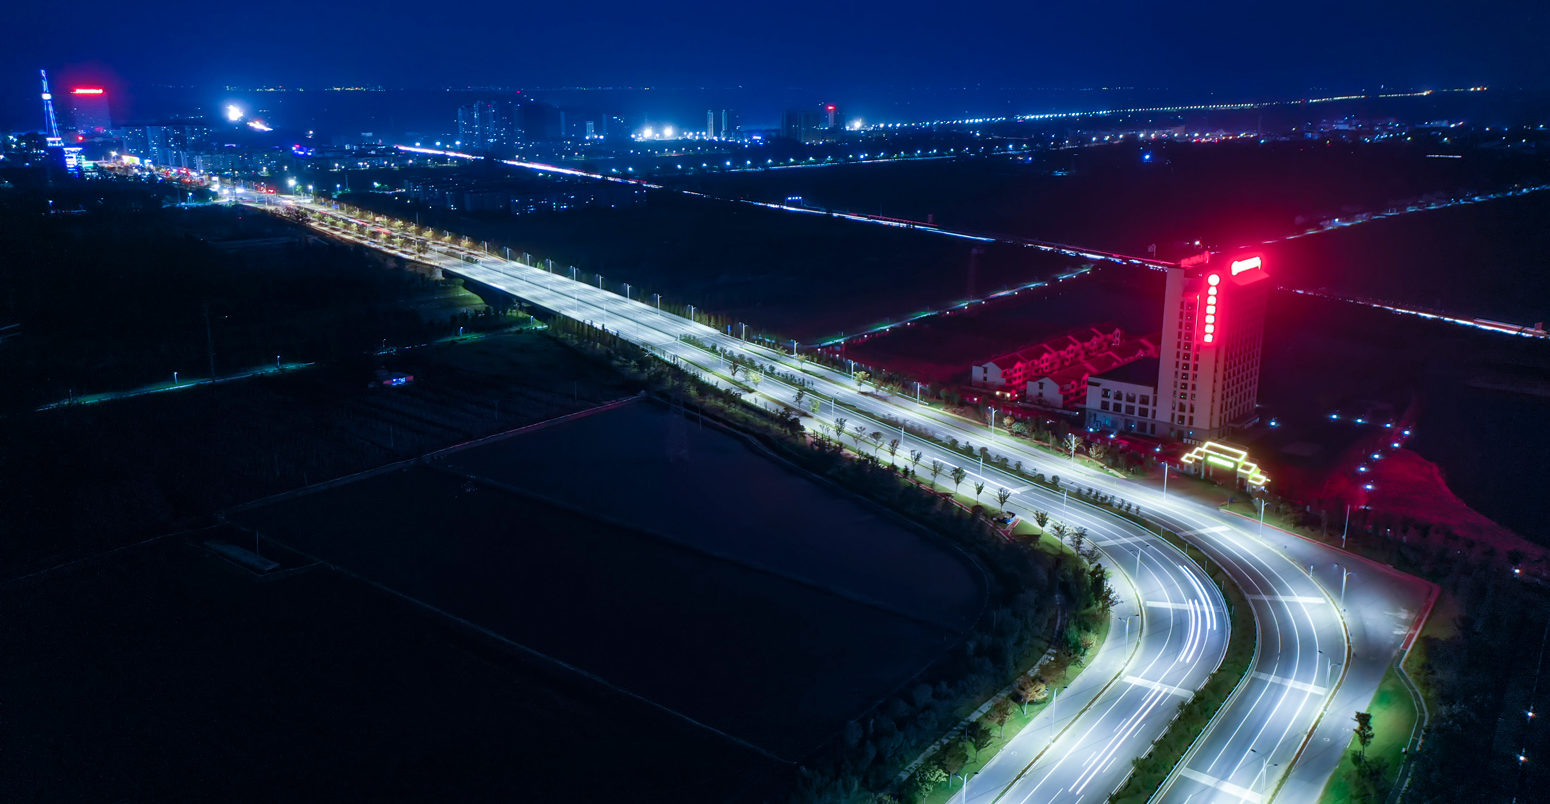 Power rationing after nightfall in Huaian in Jiangsu province, on 4 October